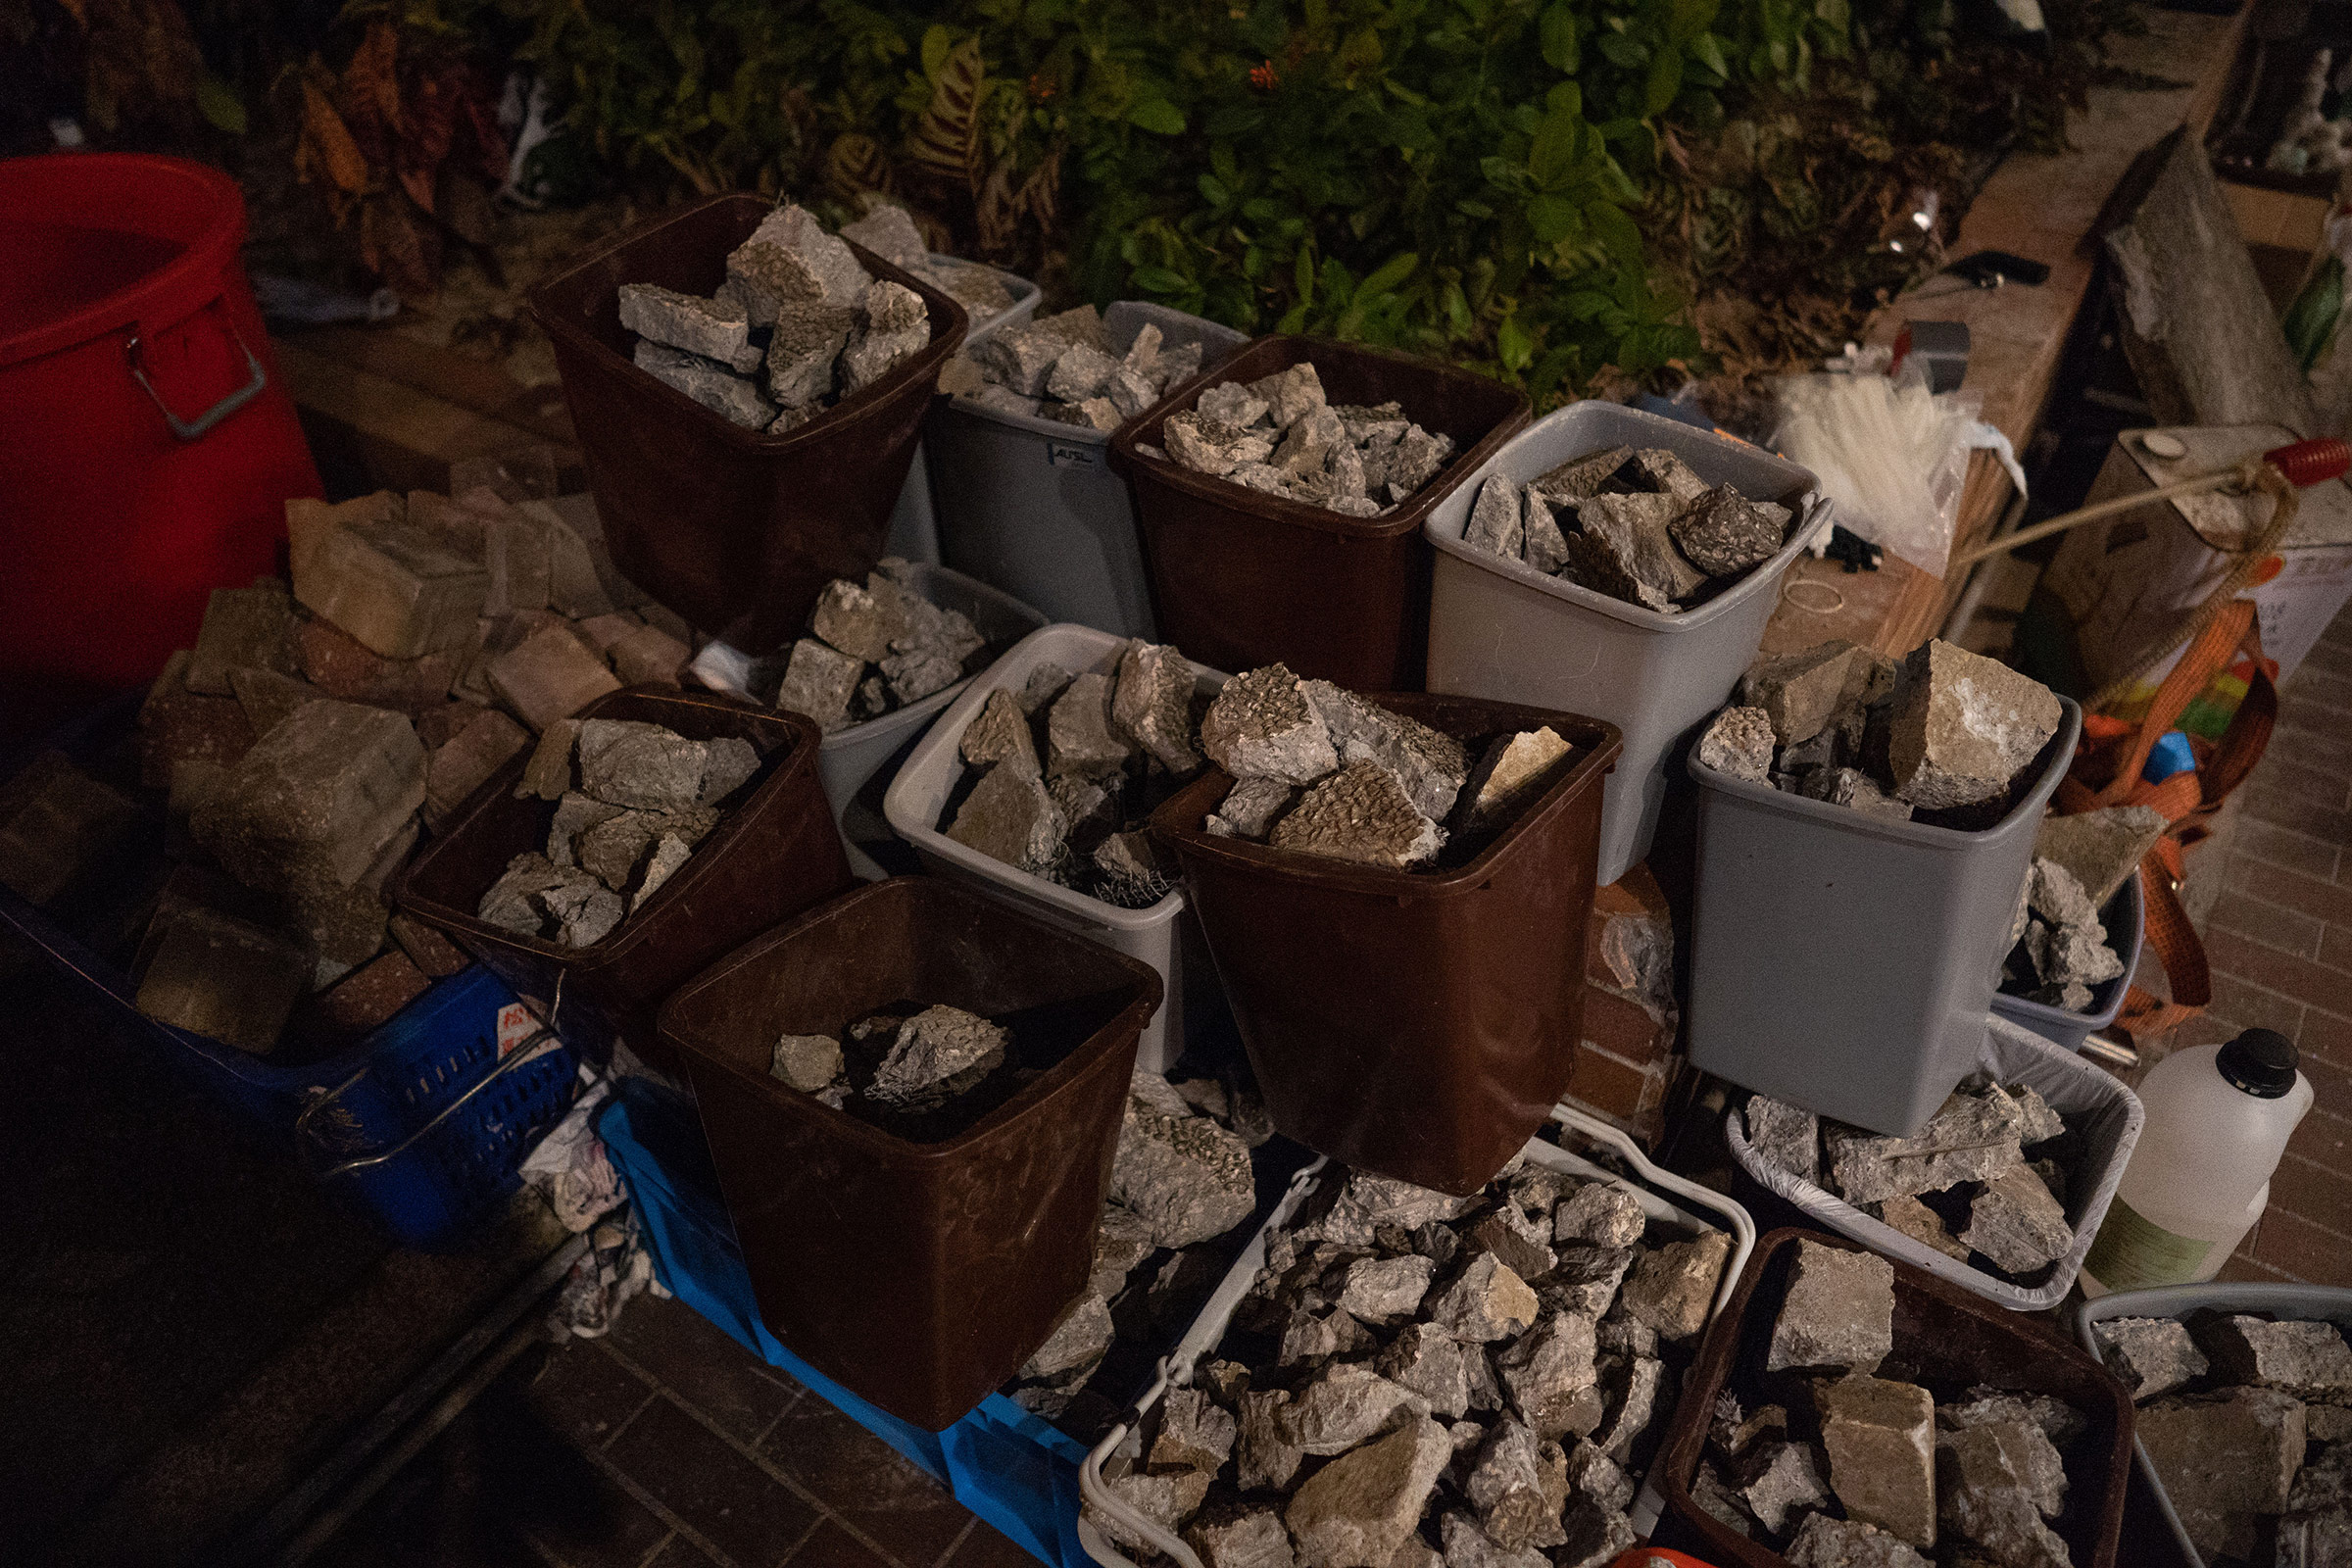 Bricks, used both to slow down advancing police as well as projectiles, are neatly sorted into garbage bins at PolyU. (Bing Guan)